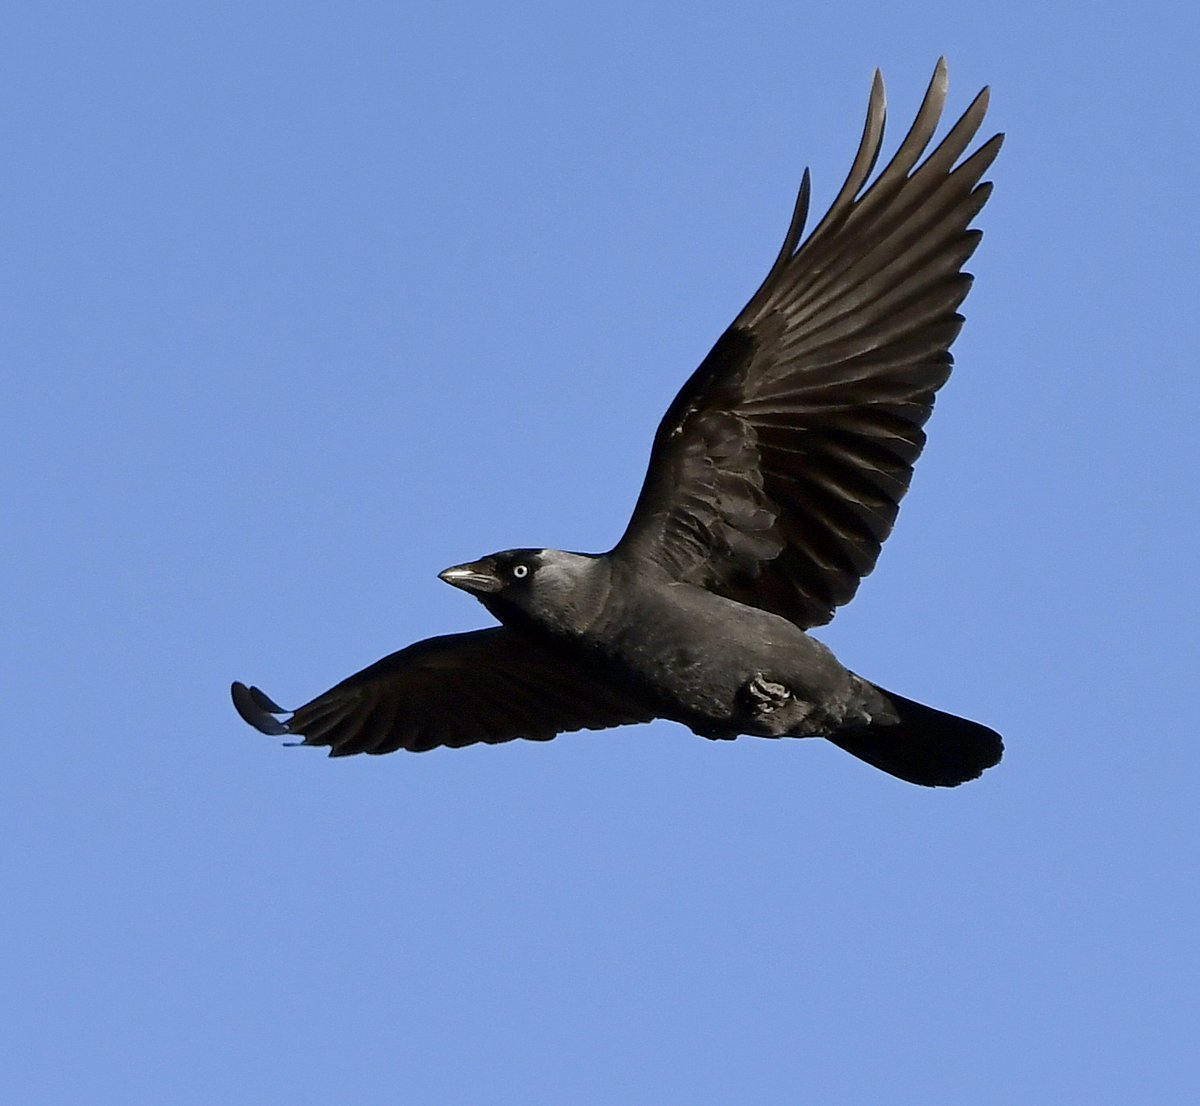 14. Jackdaw Not had one of these small corvids land in my garden yet during lockdown, but they're constantly flying back and forth overhead, calling 'Chack, chack'.  #LockdownGardenBirdsSeen 